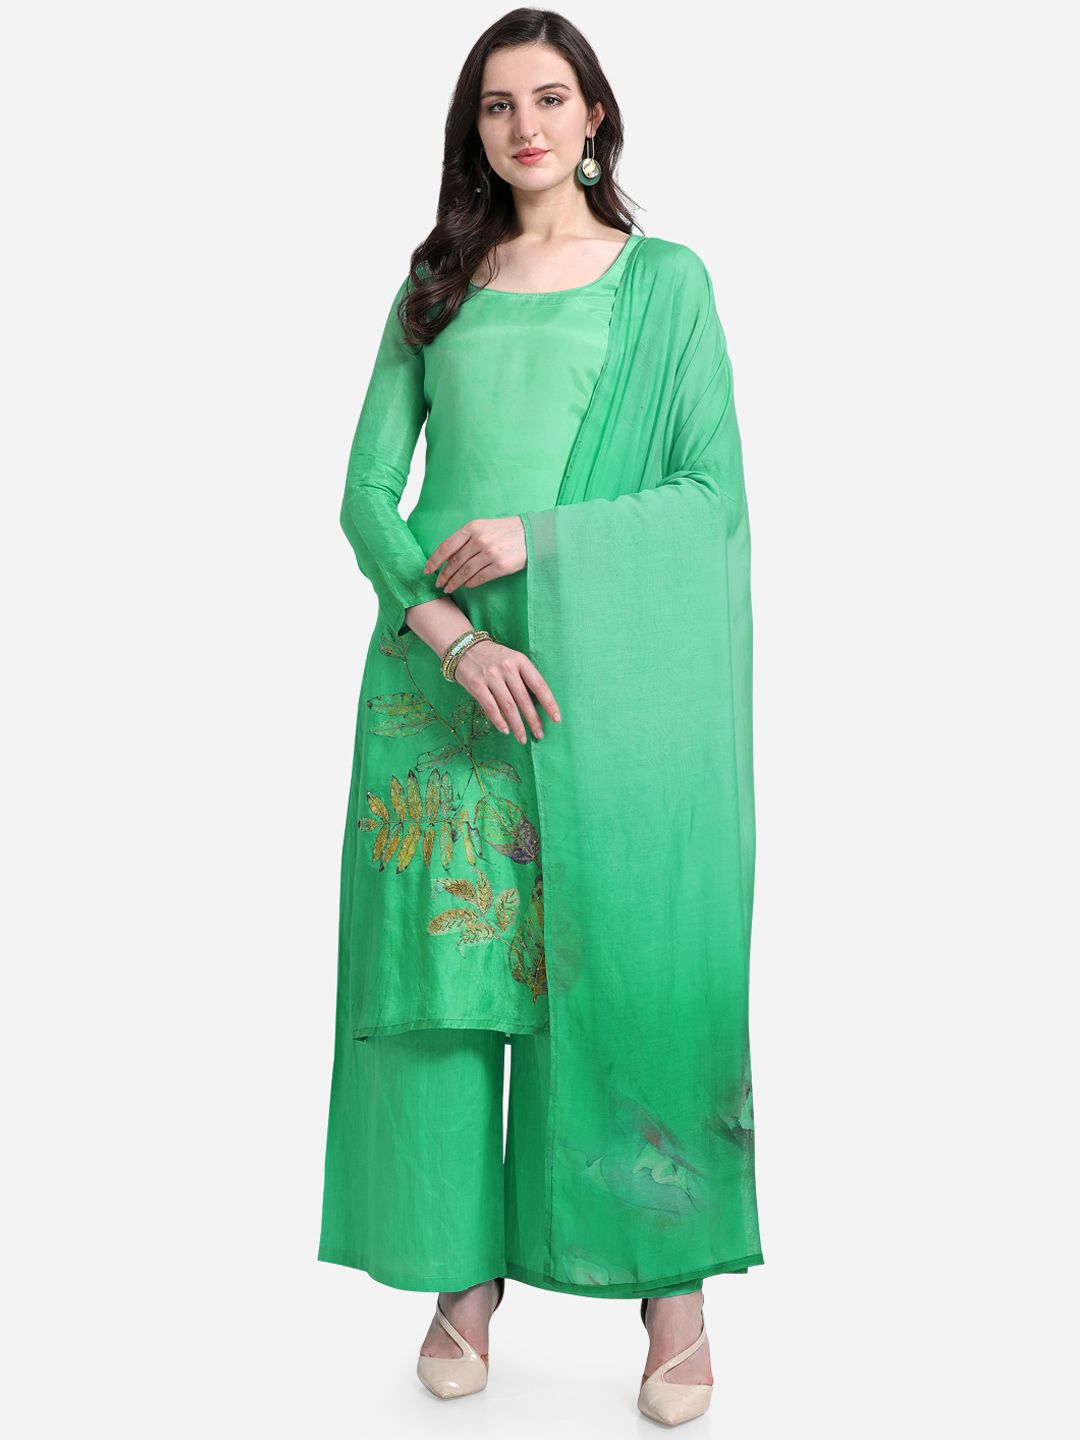 Stylee LIFESTYLE Green Satin Unstitched Dress Material Price in India